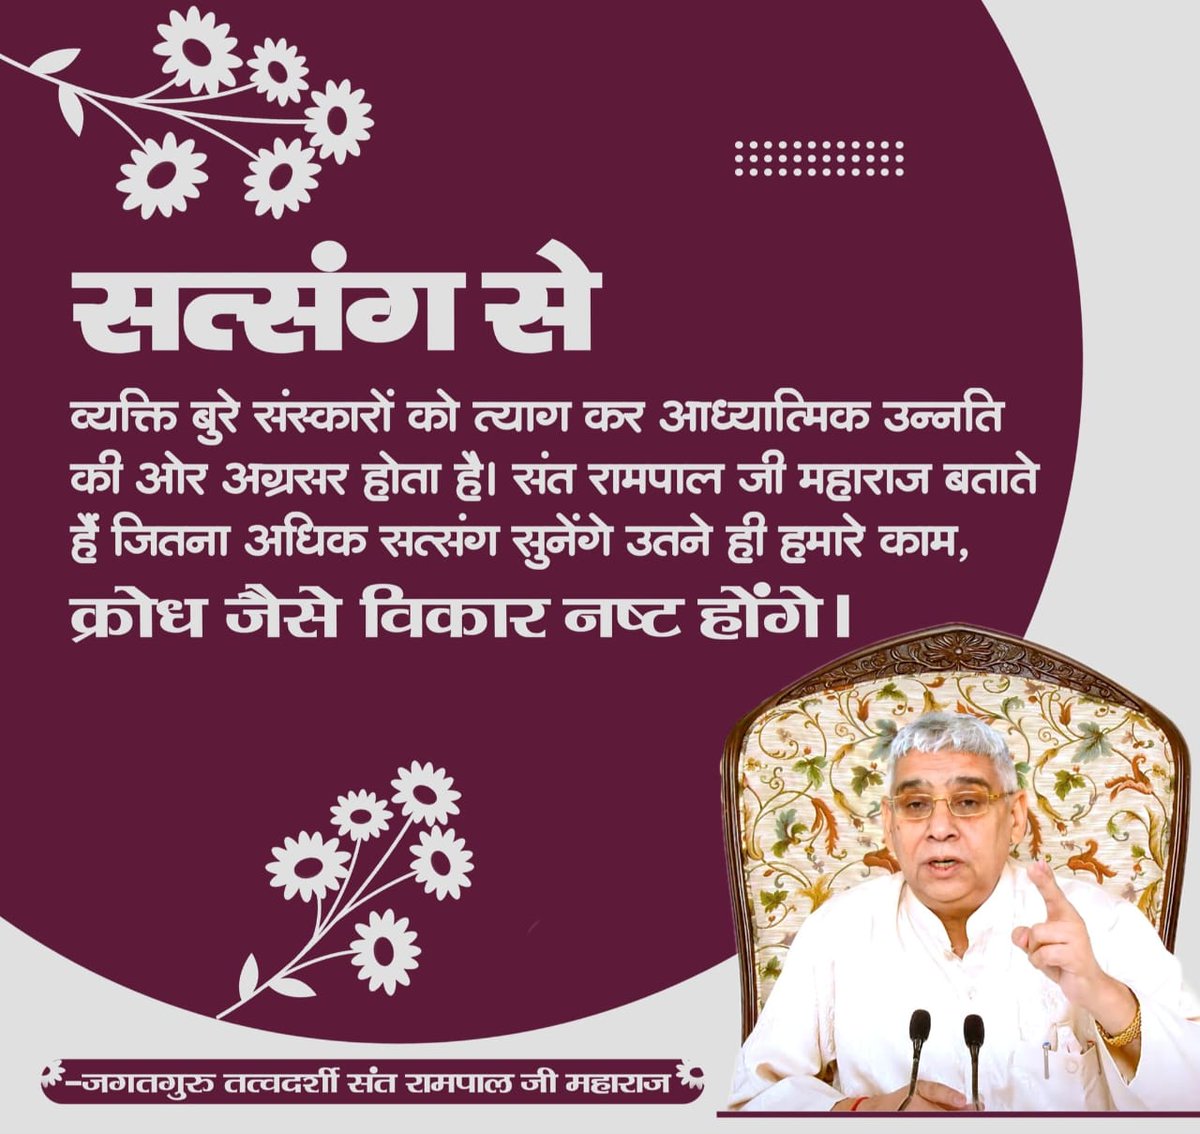 #GodMorningSunday 
Through satsang, a person abandons bad habits and progresses towards spiritual progress. Saint Rampal Ji Maharaj says that the more we listen to satsang, the more our vices like lust and anger will be destroyed.
Must Watch Sadhna TV-7:30 PM
#SaintRampalJiQuotes